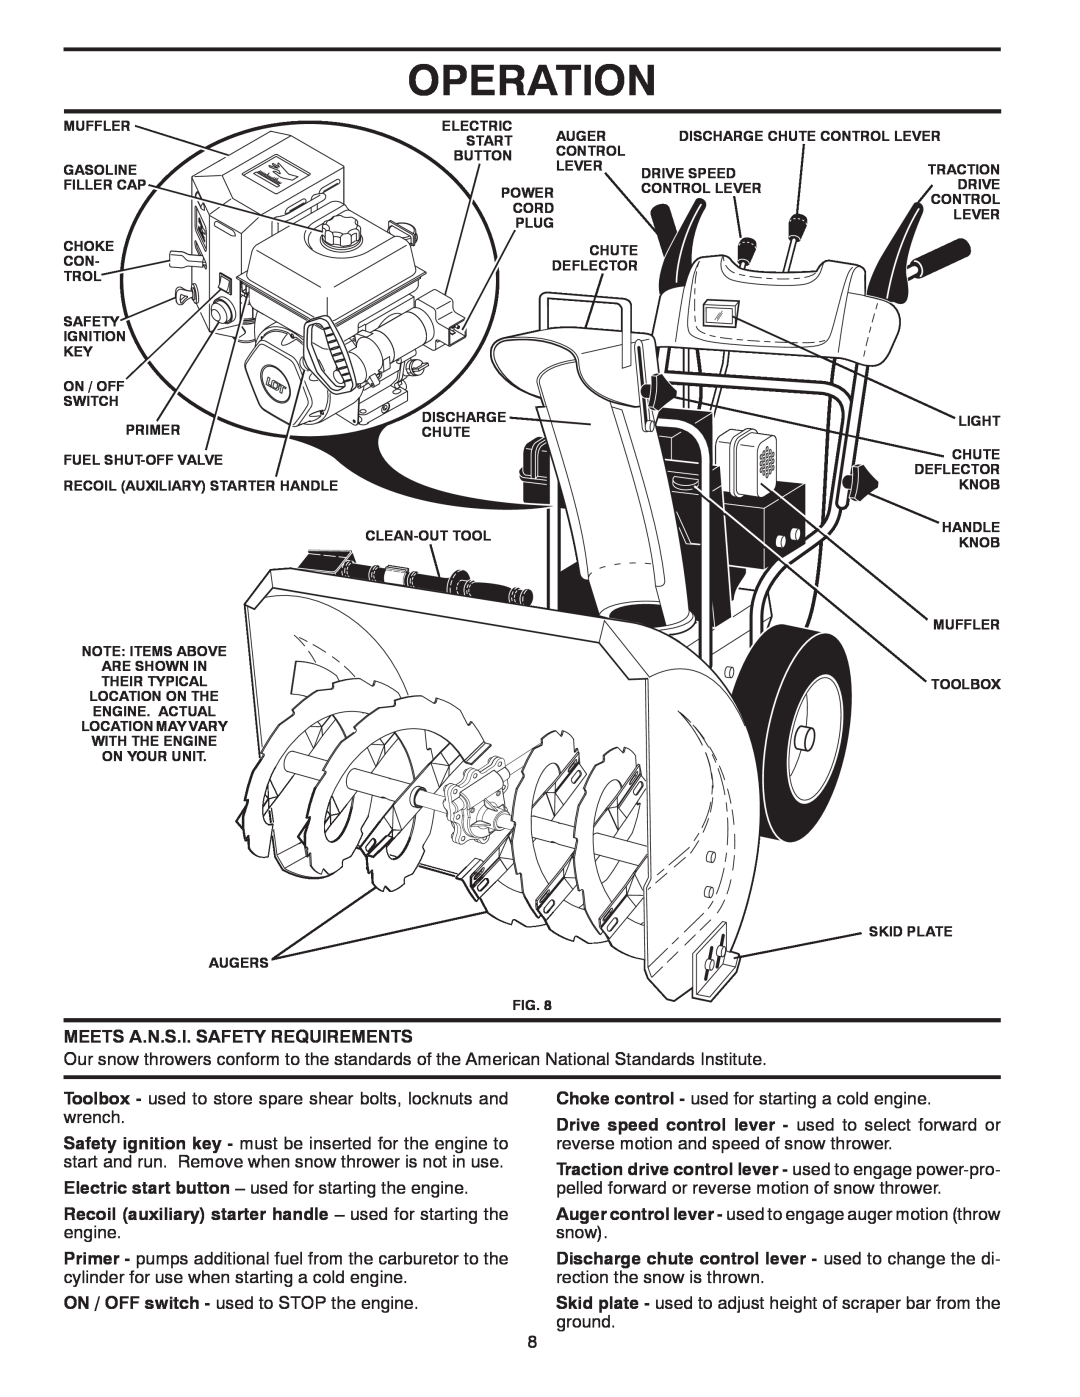 McCulloch MC12527ES owner manual Operation, Meets A.N.S.I. Safety Requirements, ON / OFF switch - used to STOP the engine 